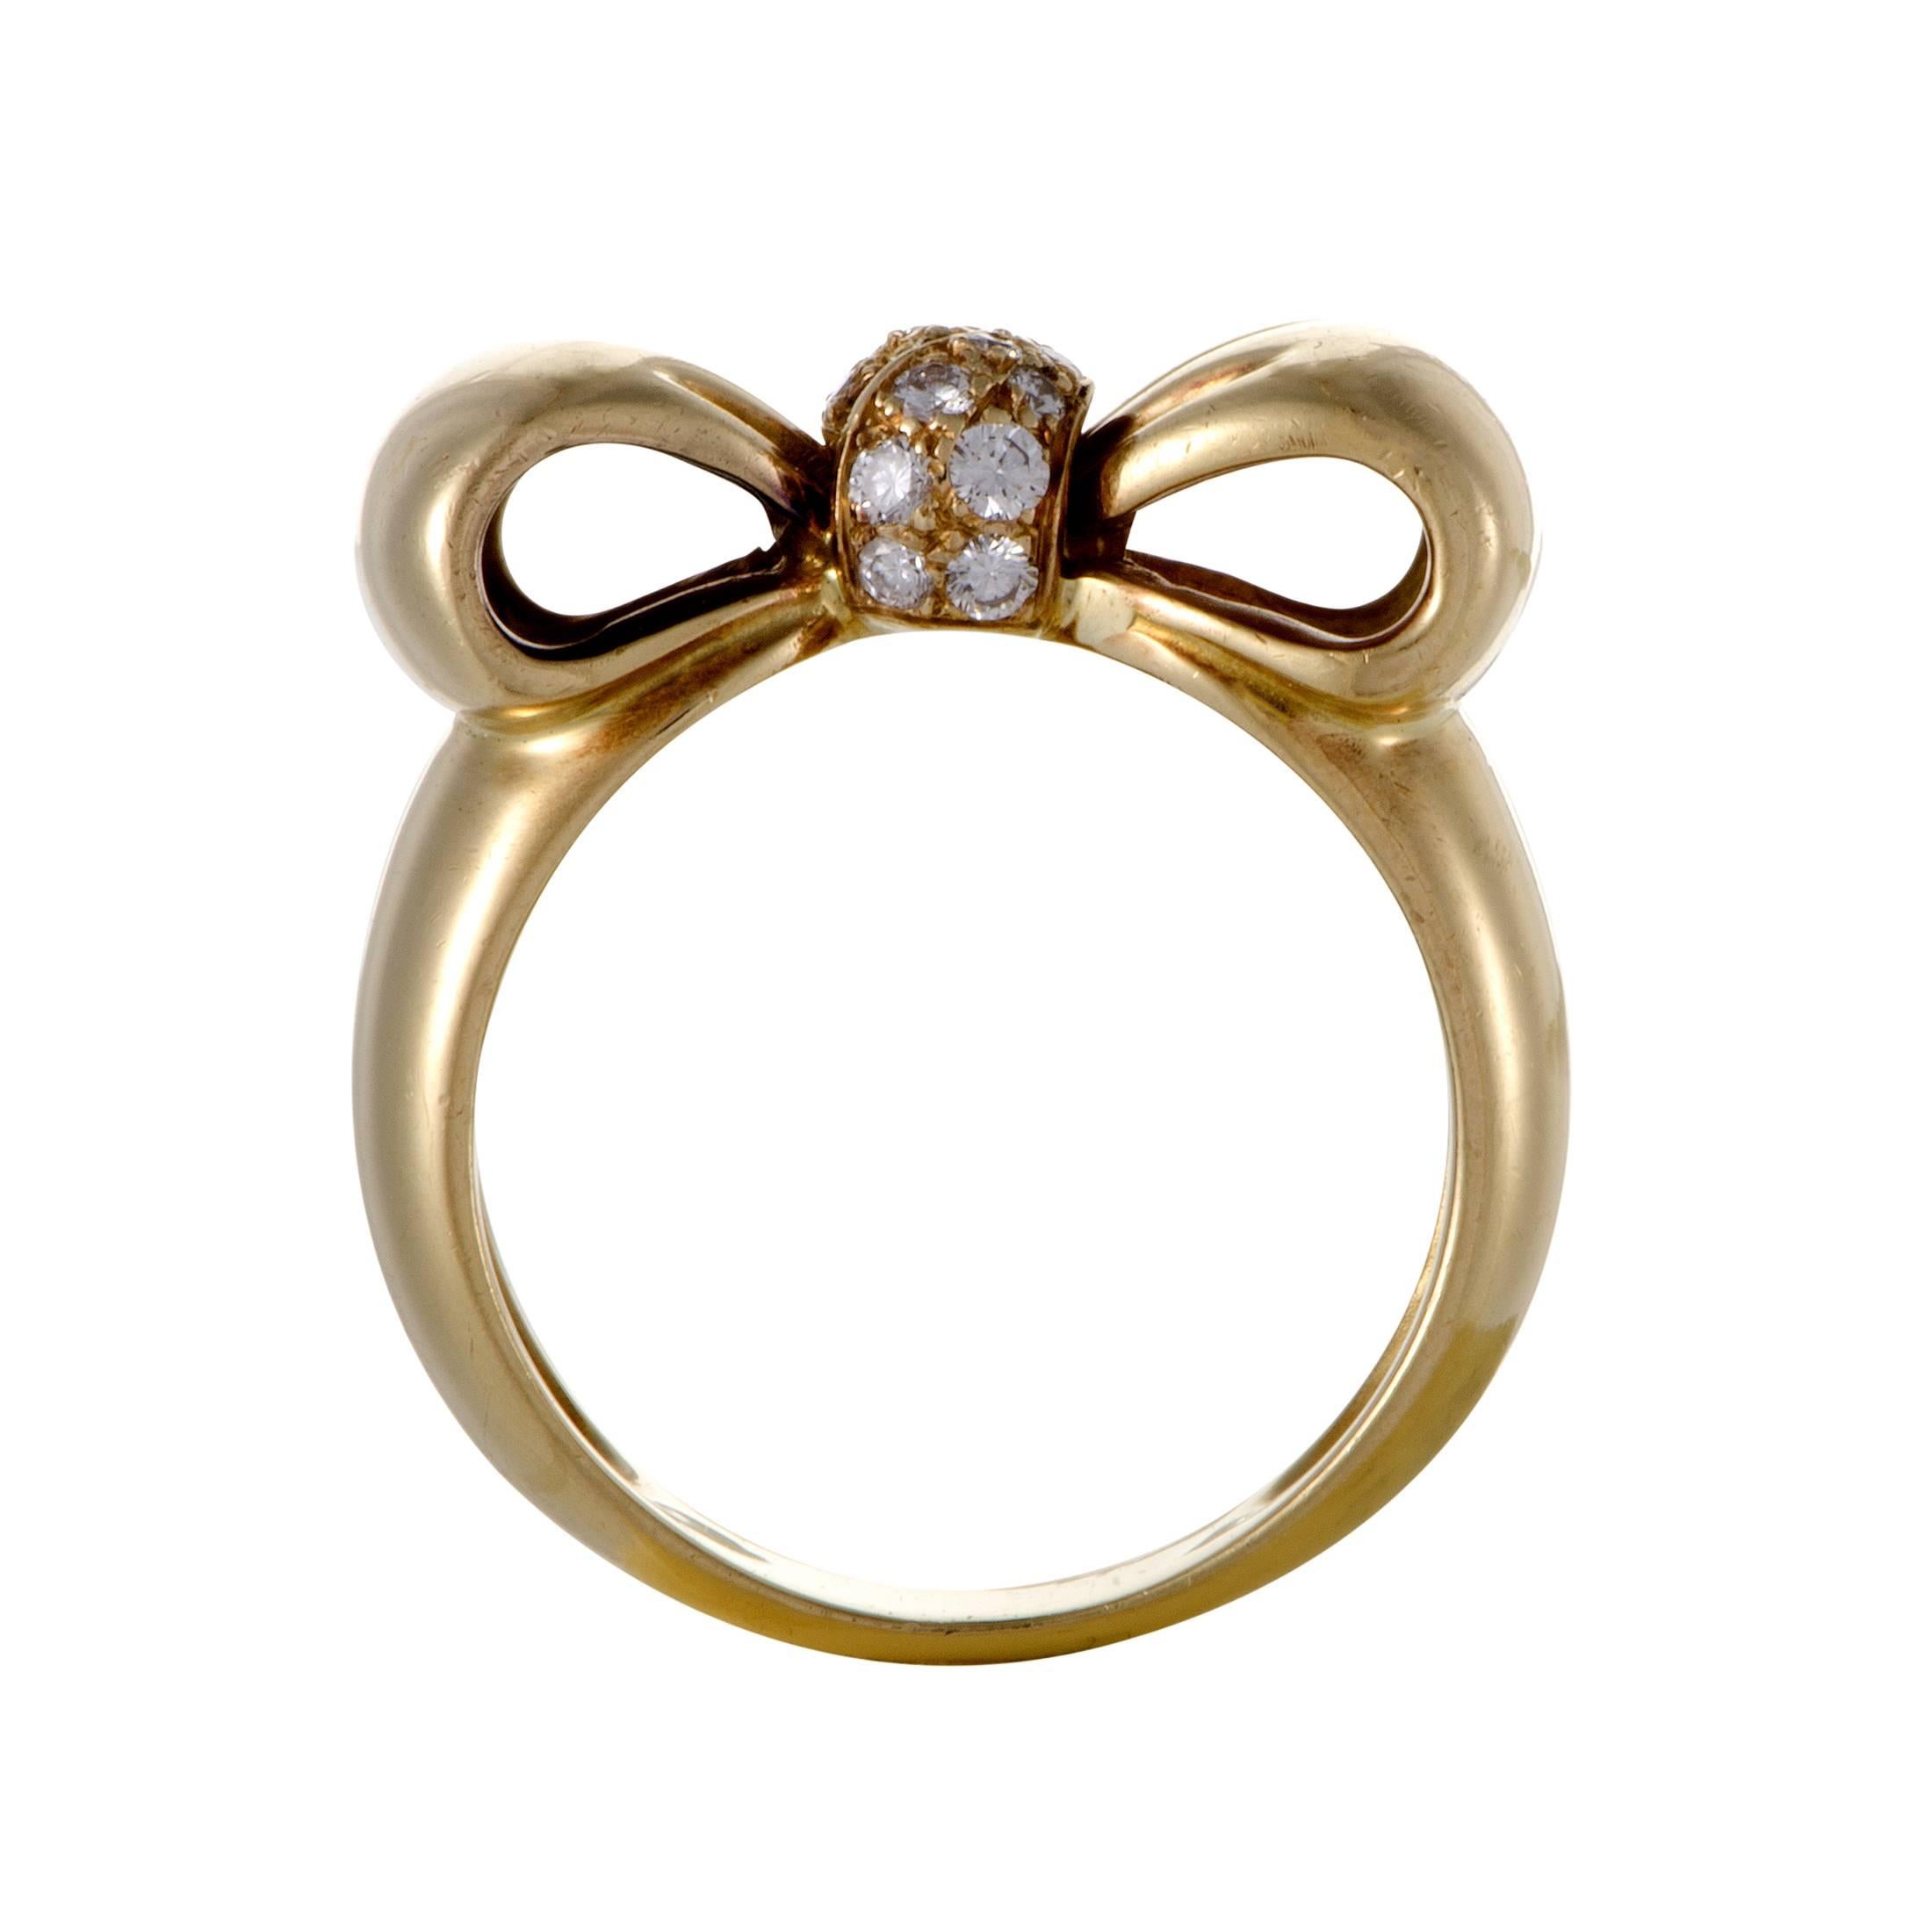 Designed in the adorable form of a bow and adorned with lustrous diamonds weighing in total 0.20ct, this exceptional ring from Van Cleef & Arpels is made of precious 18K yellow gold to exude an alluring aura of feminine radiance.
Ring Top